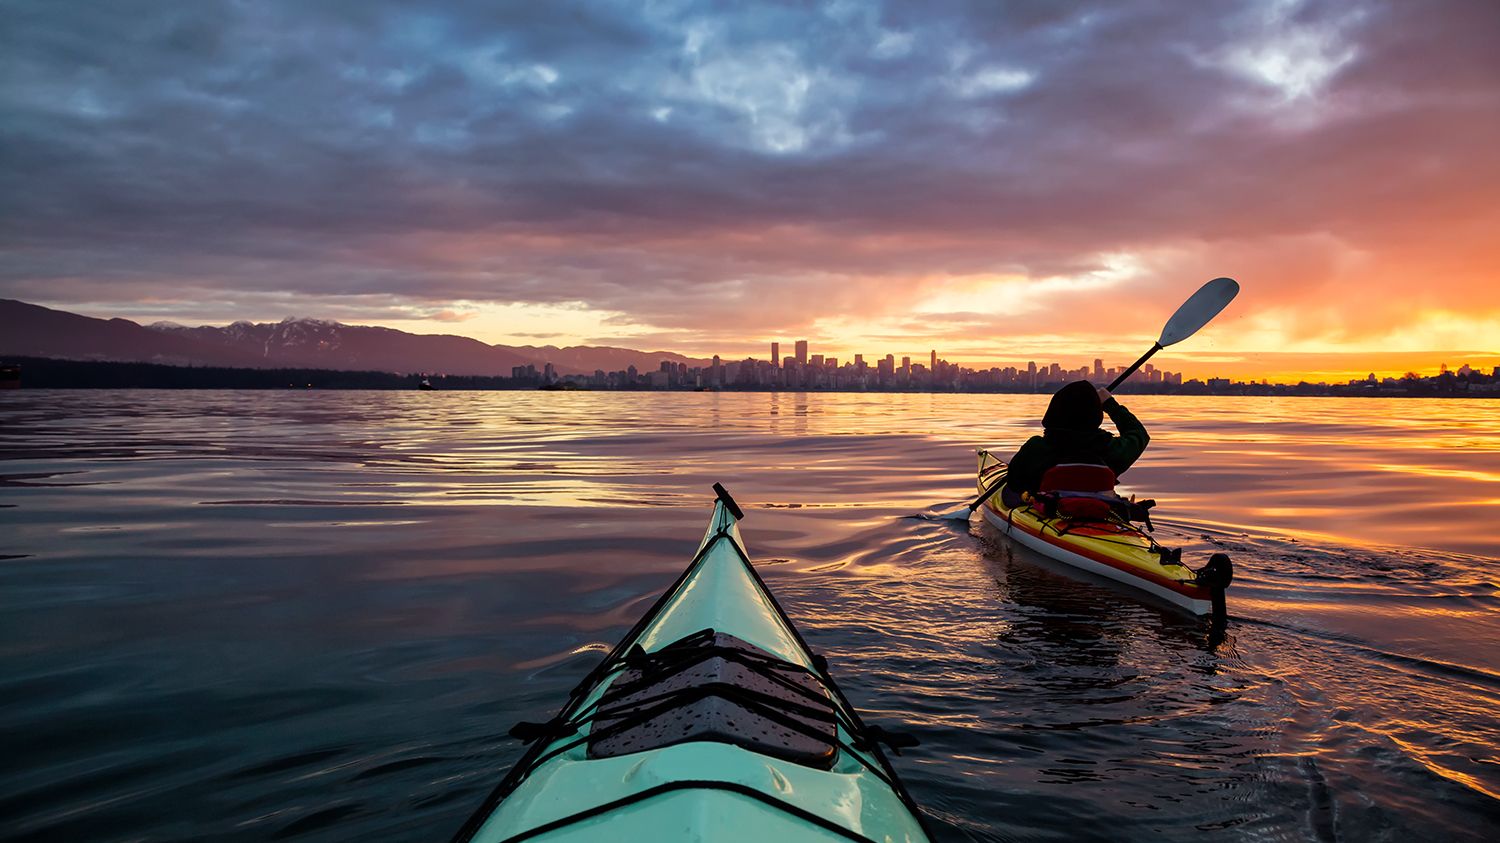 Night Kayaking In Florida: 3 Tips For a Perfect Experience